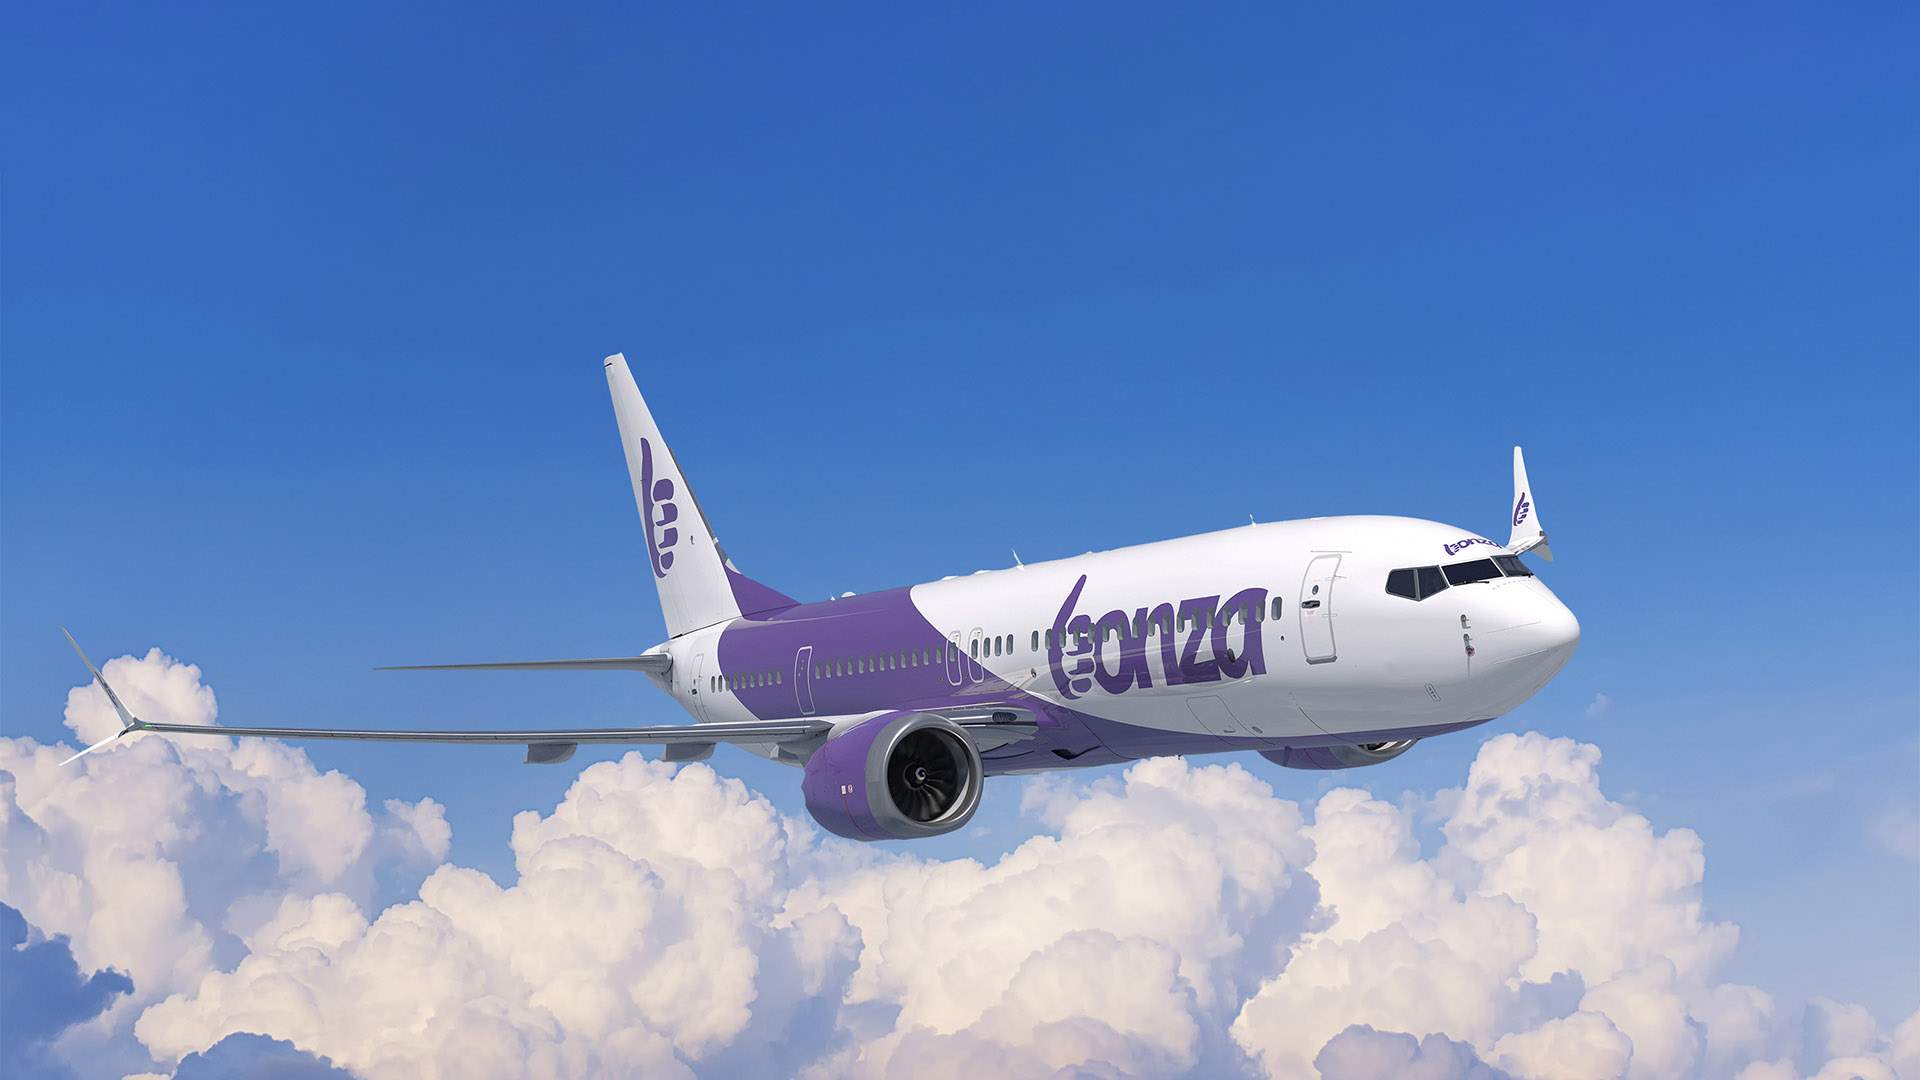 Bonza Is the New Low-Cost Airline Taking to Australia's Skies in Early 2022